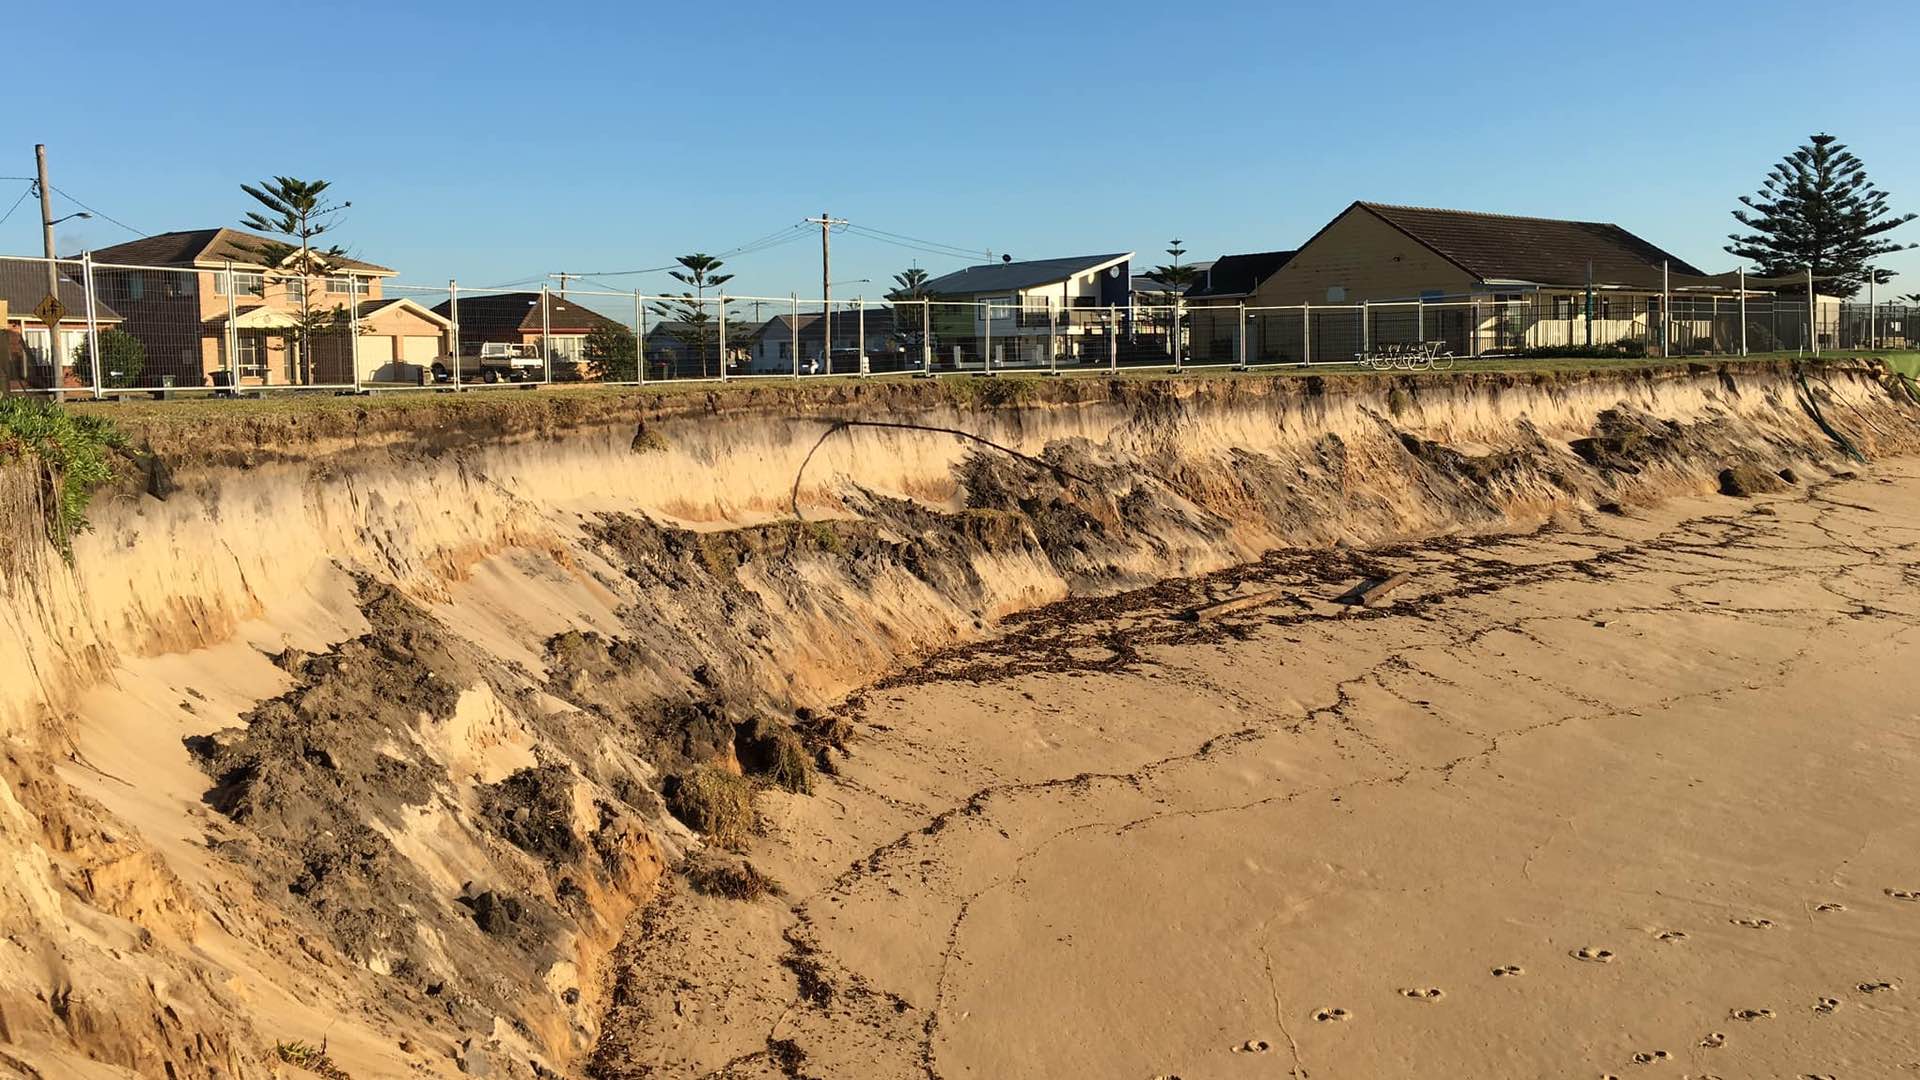 One of Australia's Most Beautiful Beaches Has Been Washed Away